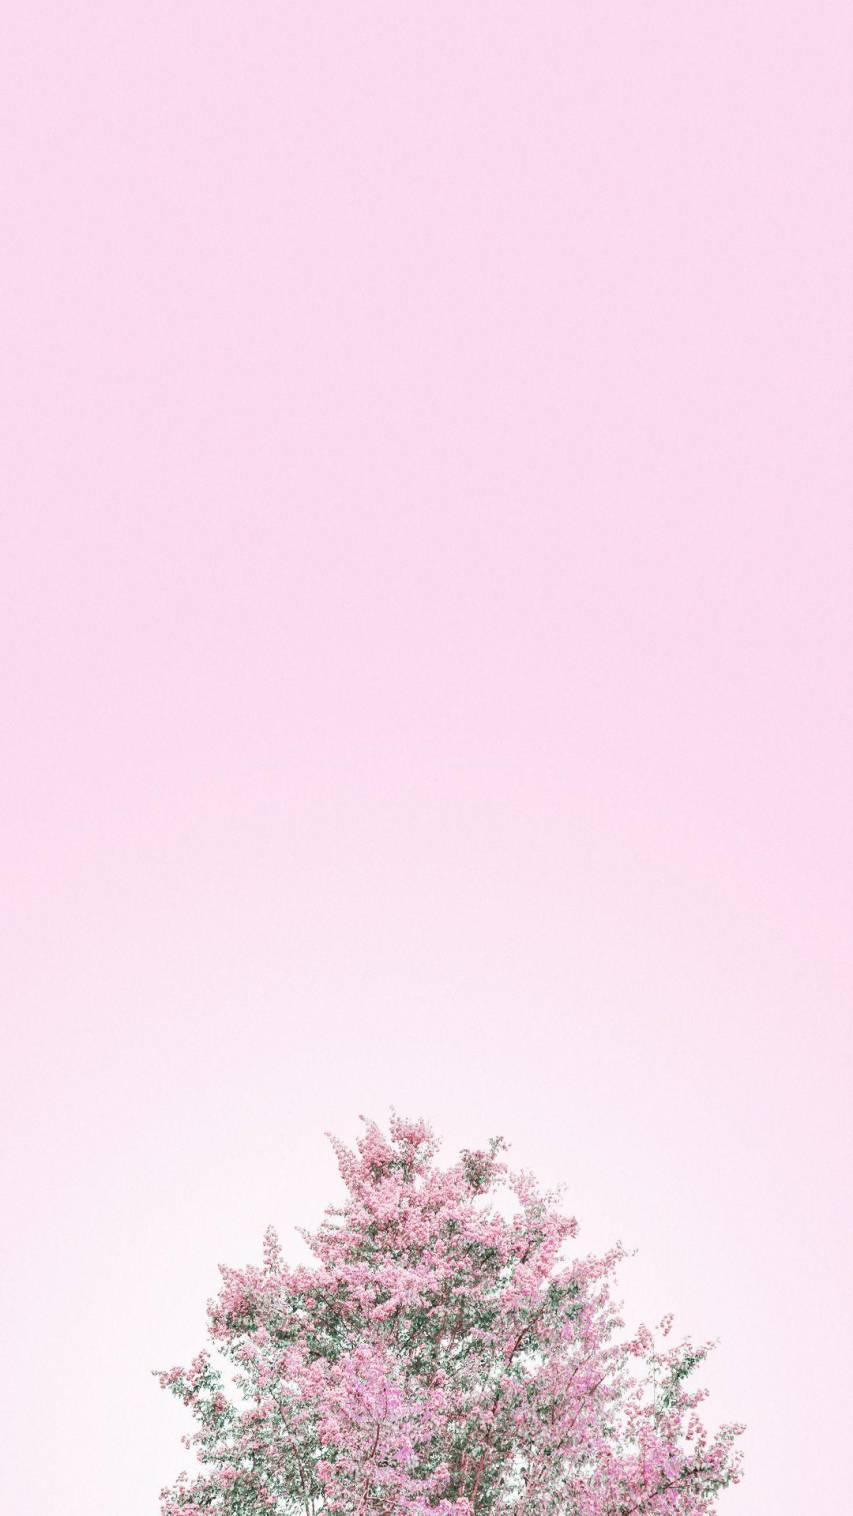 A tree with pink flowers in the background - Pastel minimalist